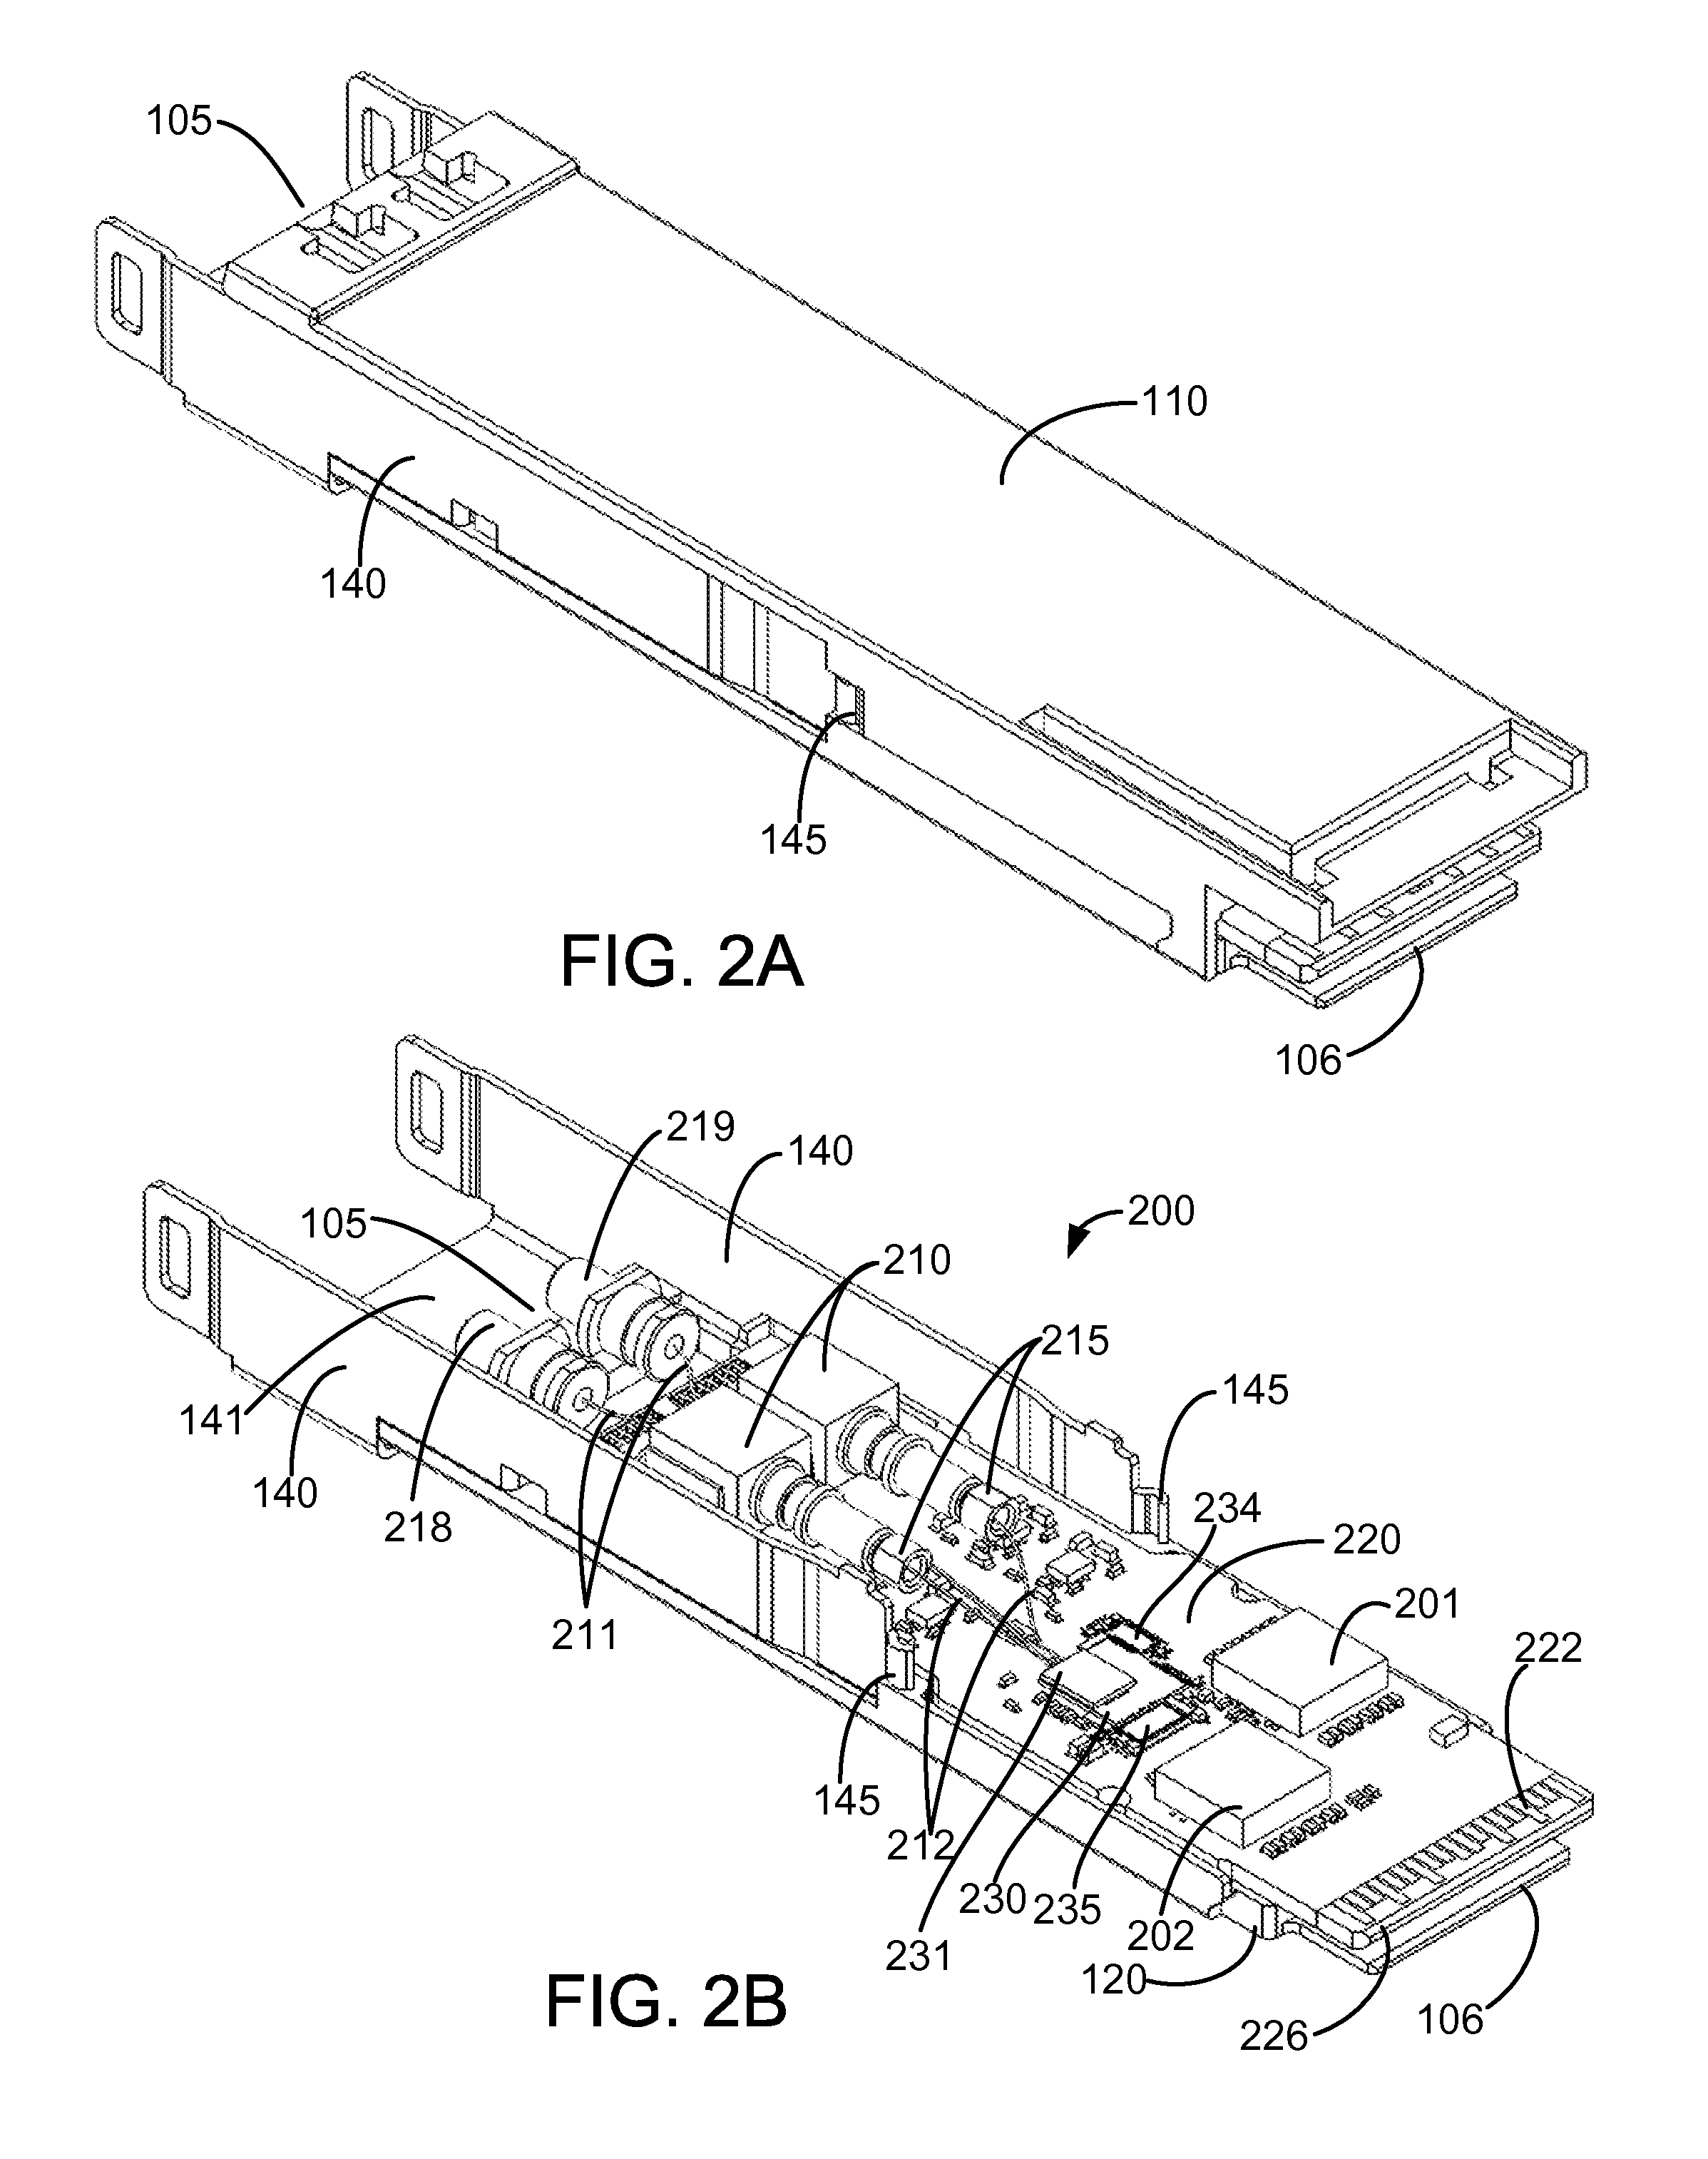 Photonic transceiving device package structure